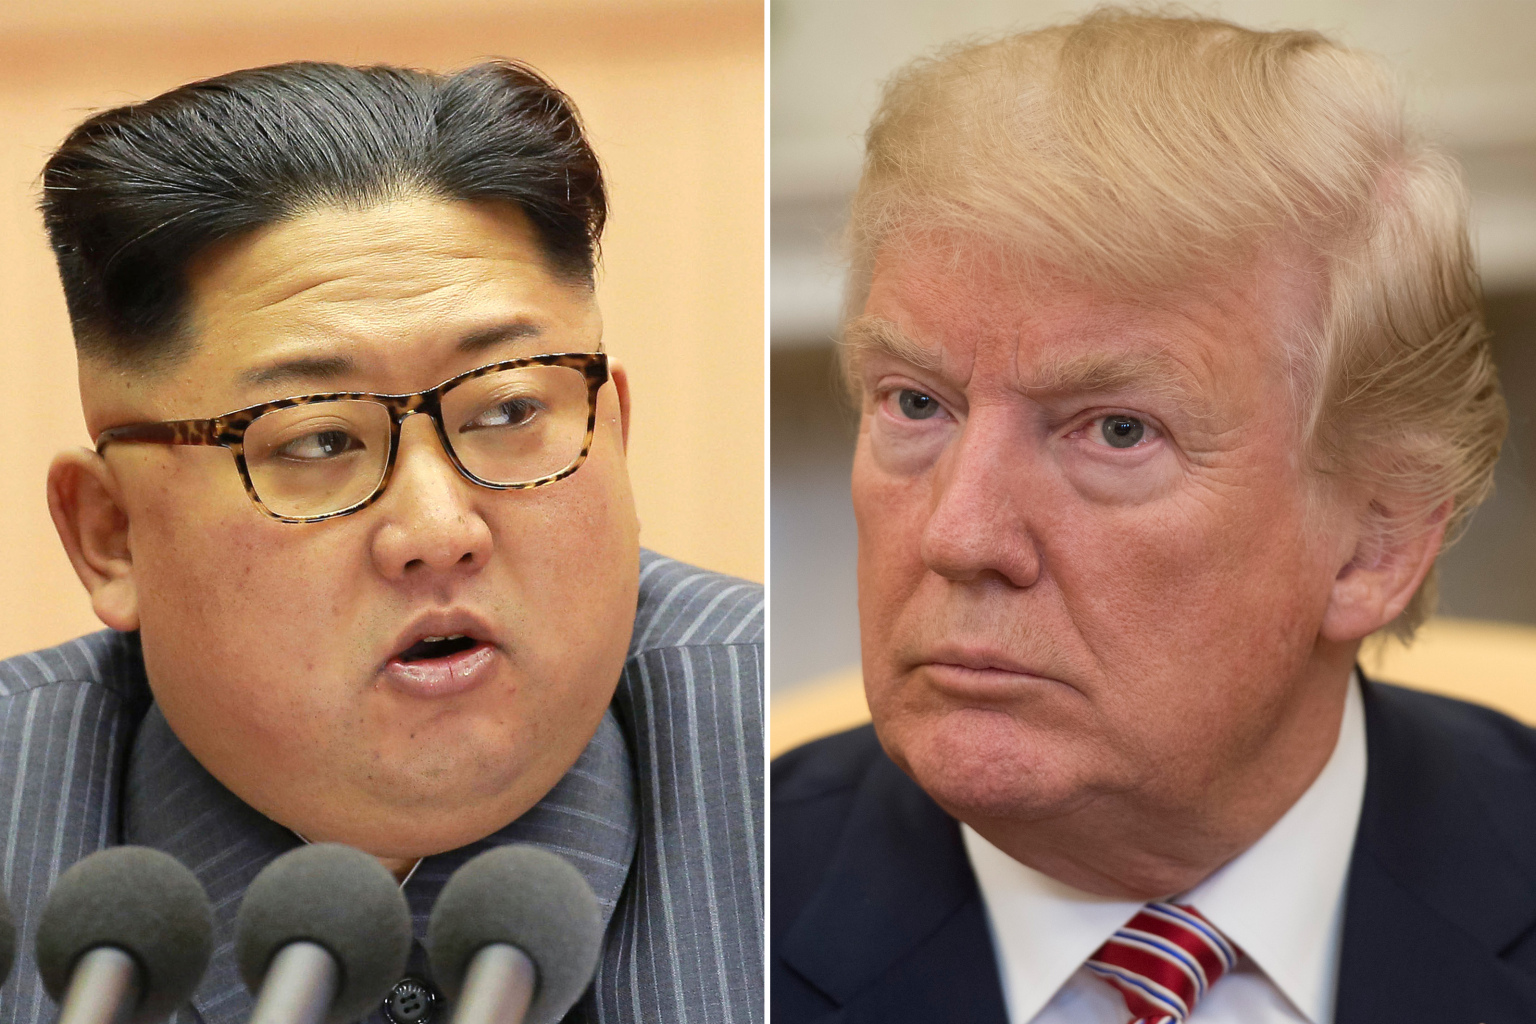 Trump casts doubt on June summit with Kim